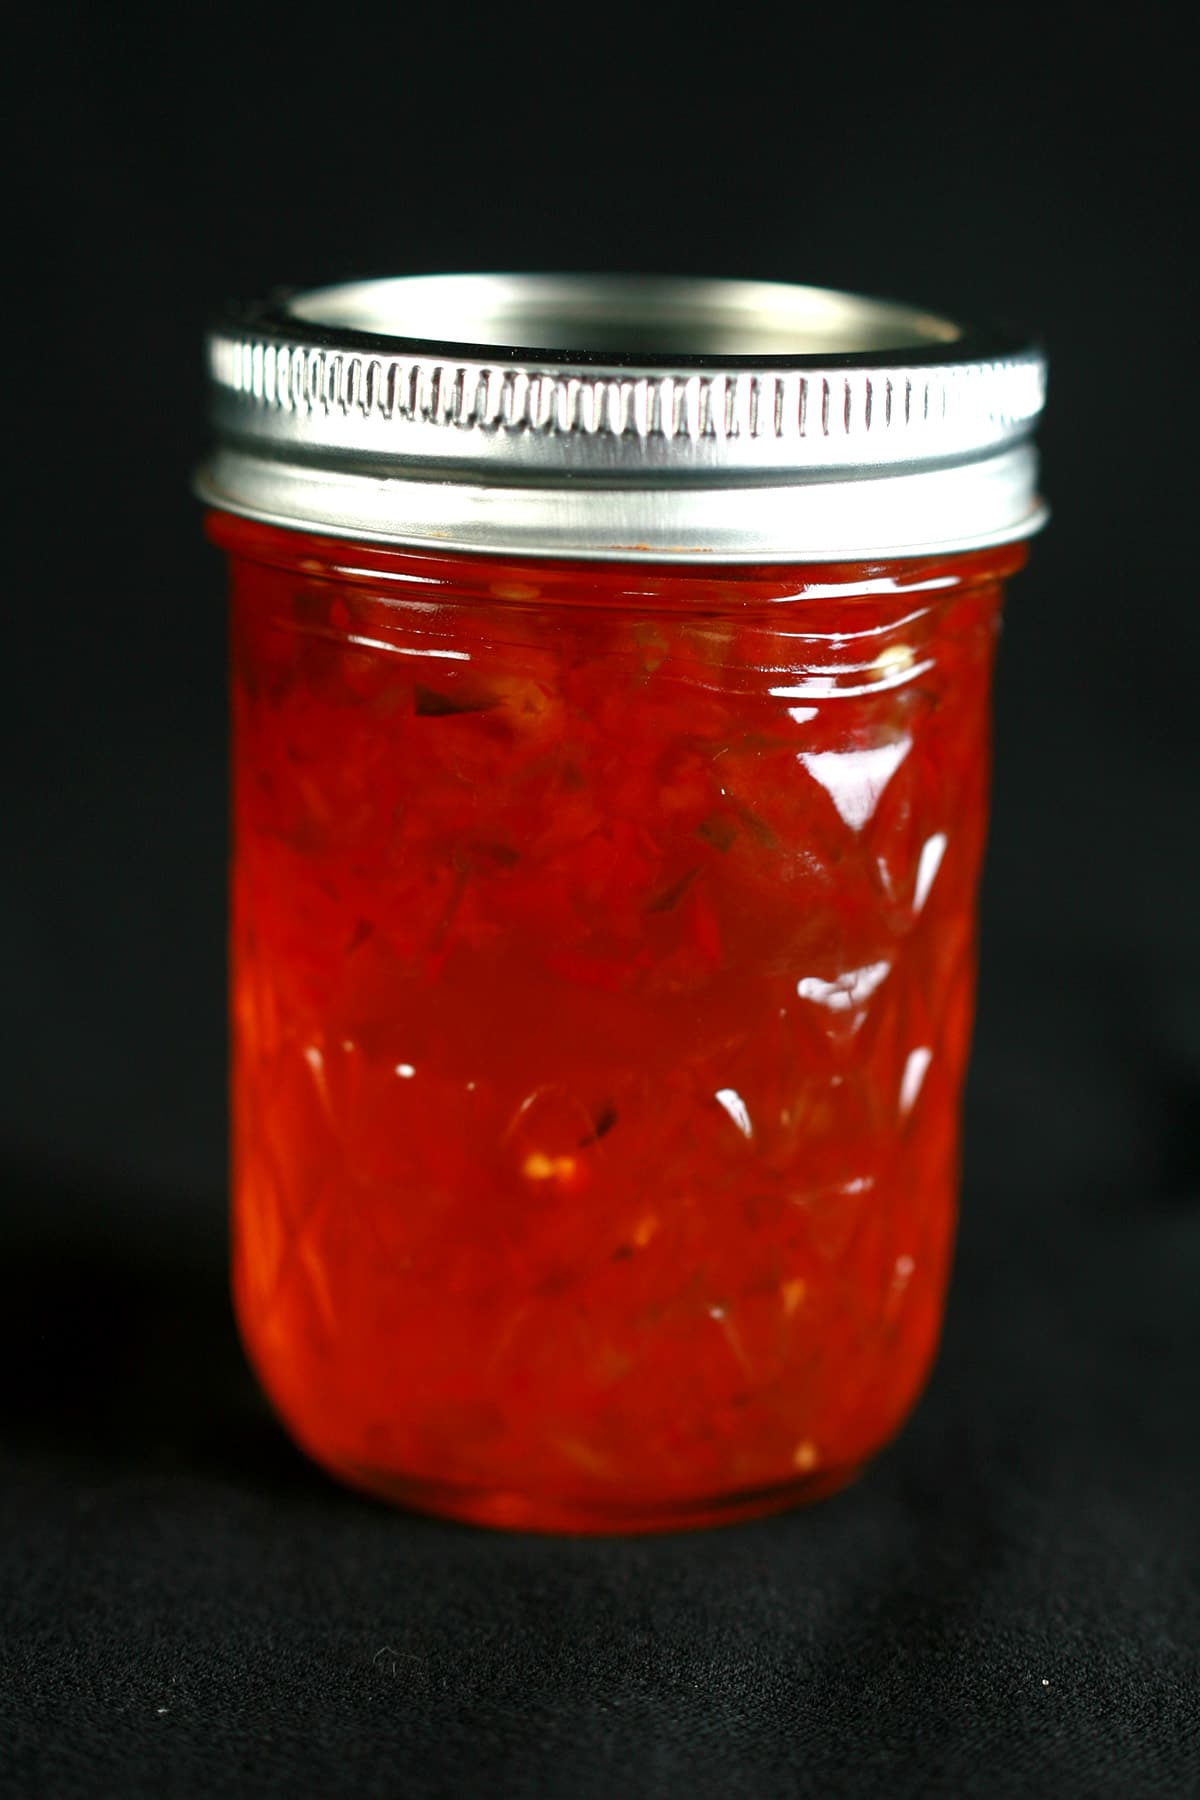 A jar of red pepper jelly.